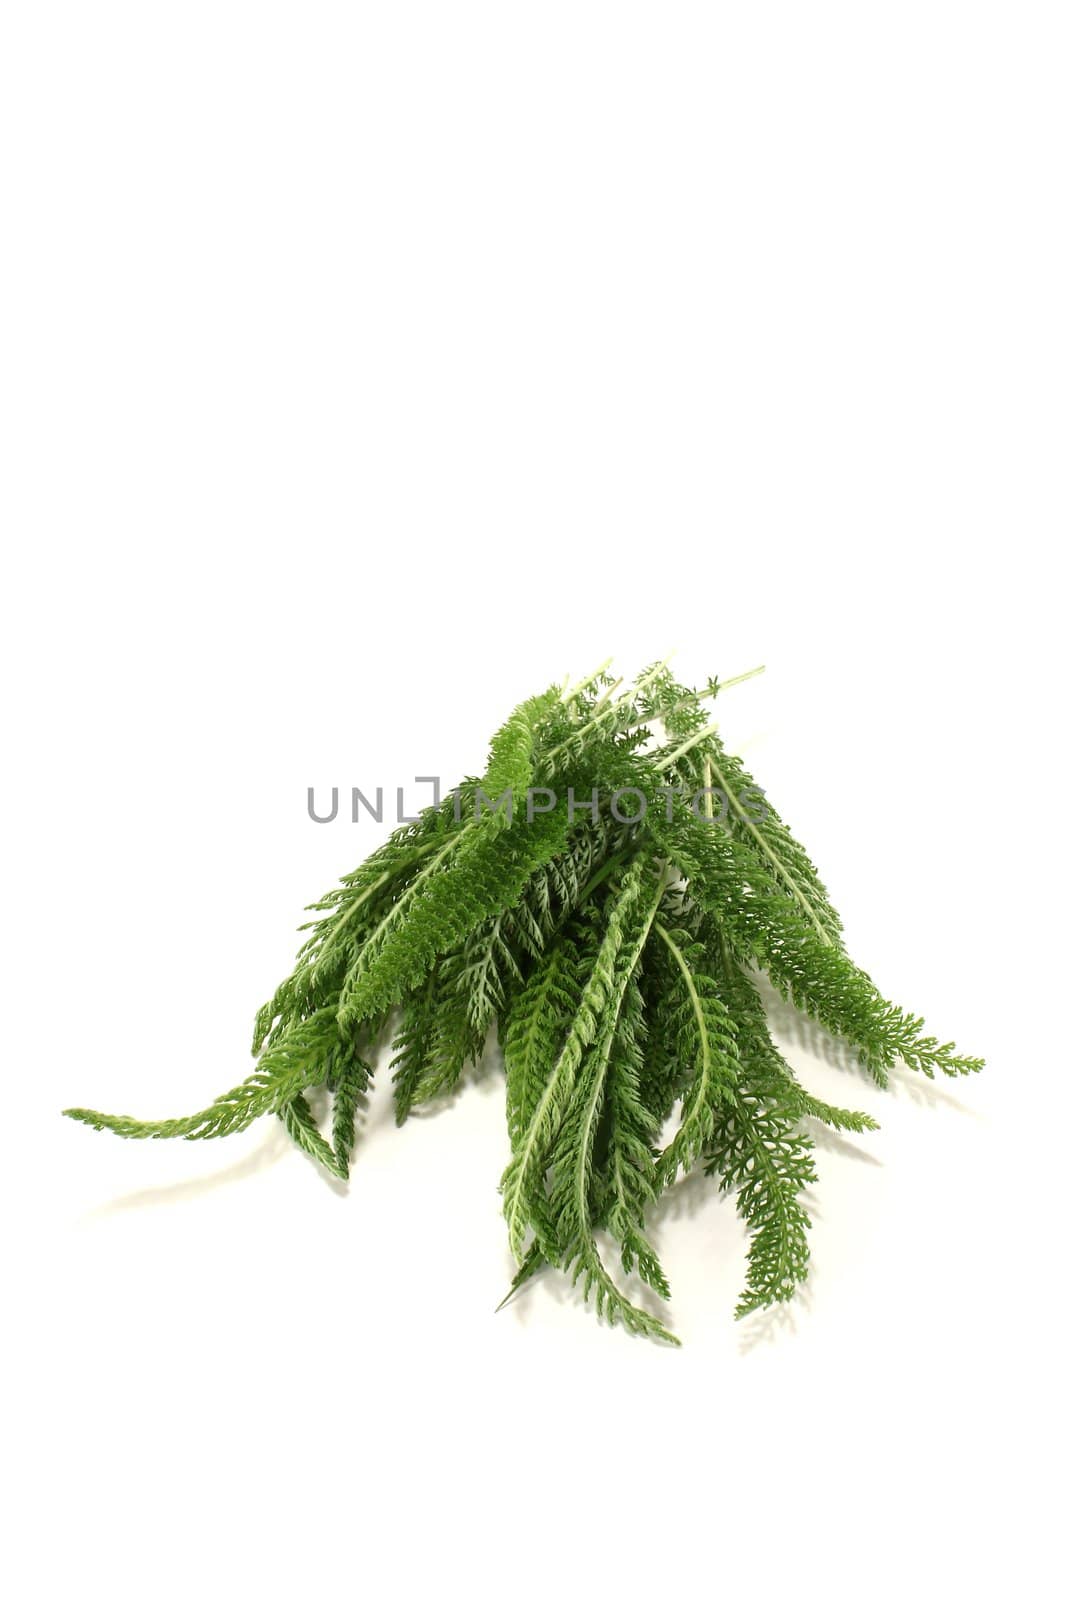 fresh green Yarrow with leaves on a bright background